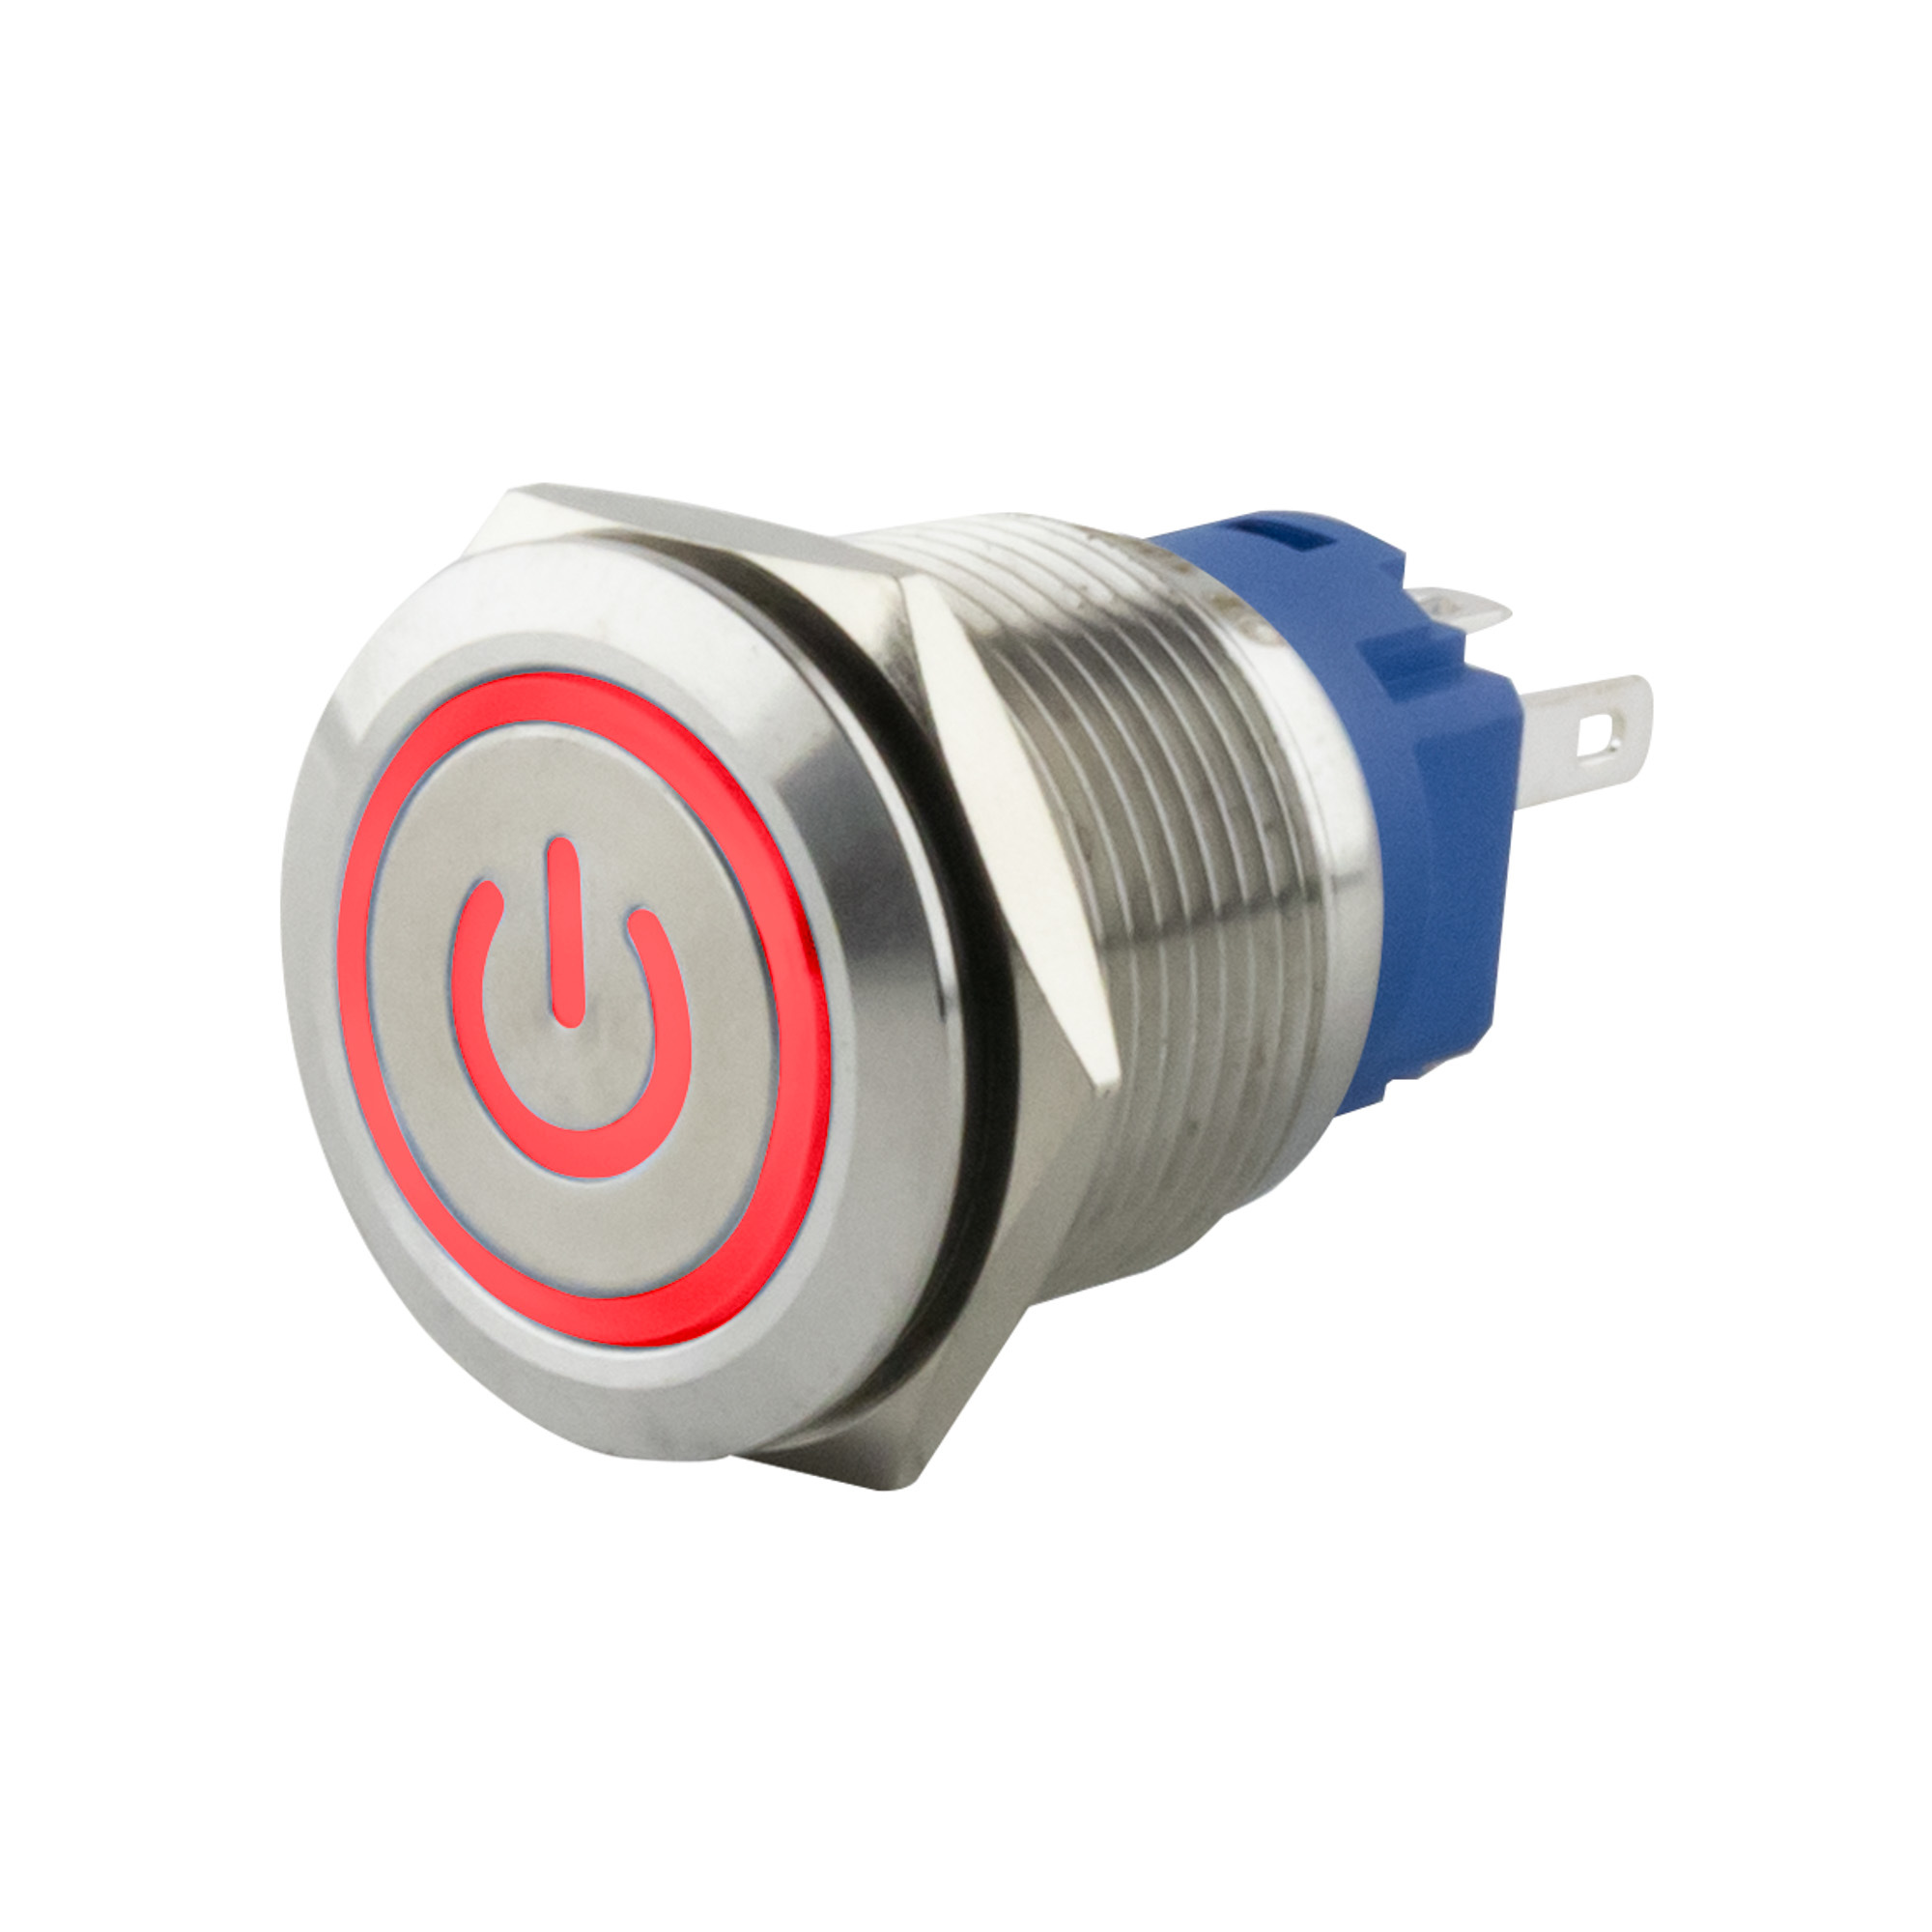 Push-button momentary Ø19mm symbol Power LED red